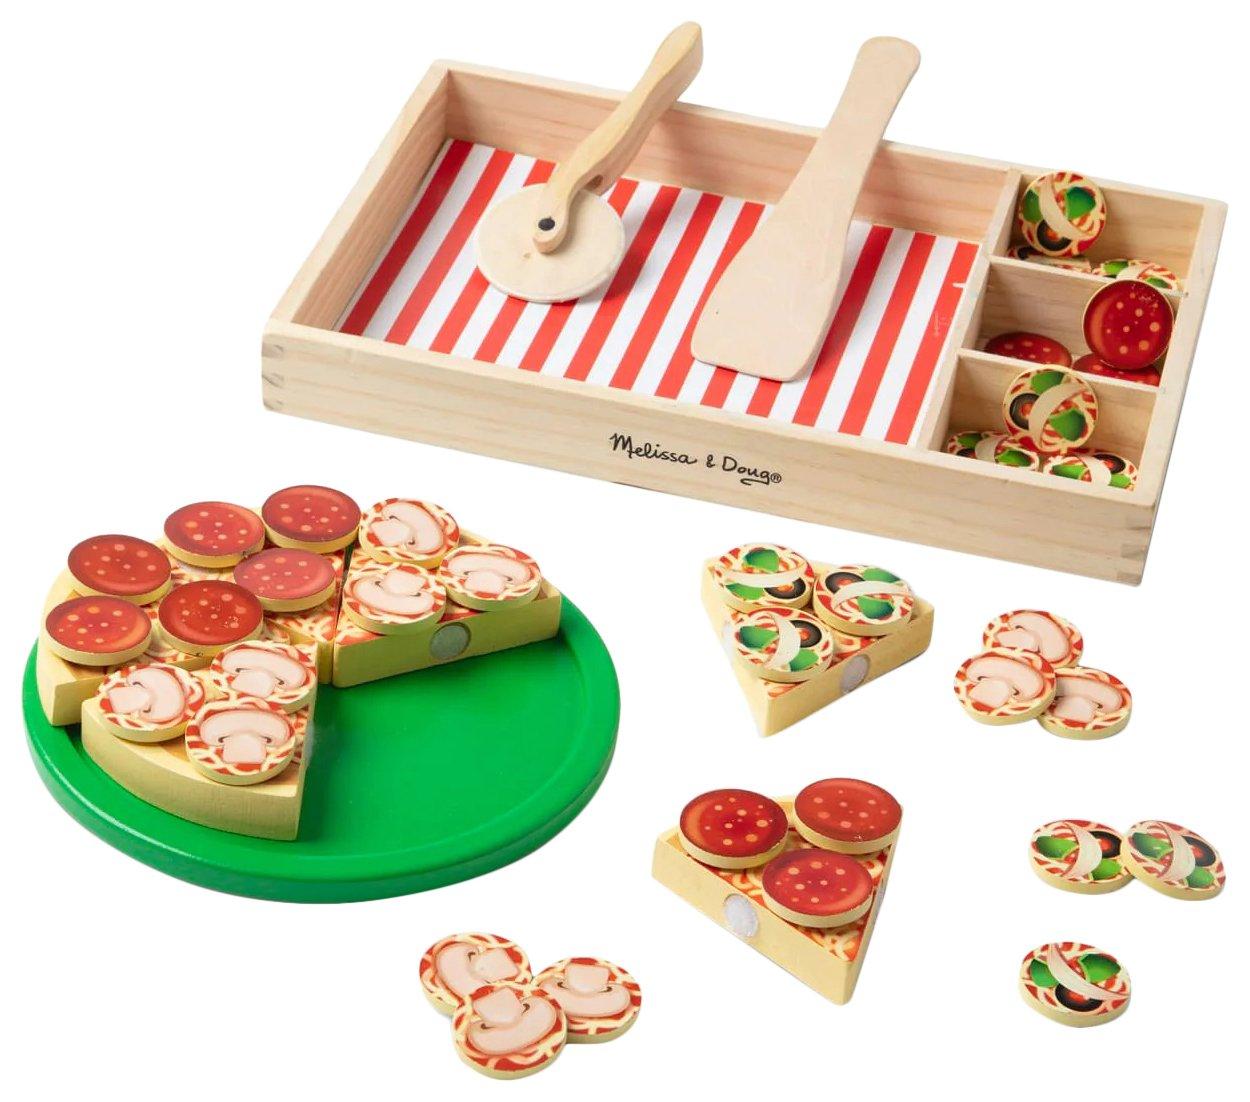 Pizza Party  Wooden Play Food Set